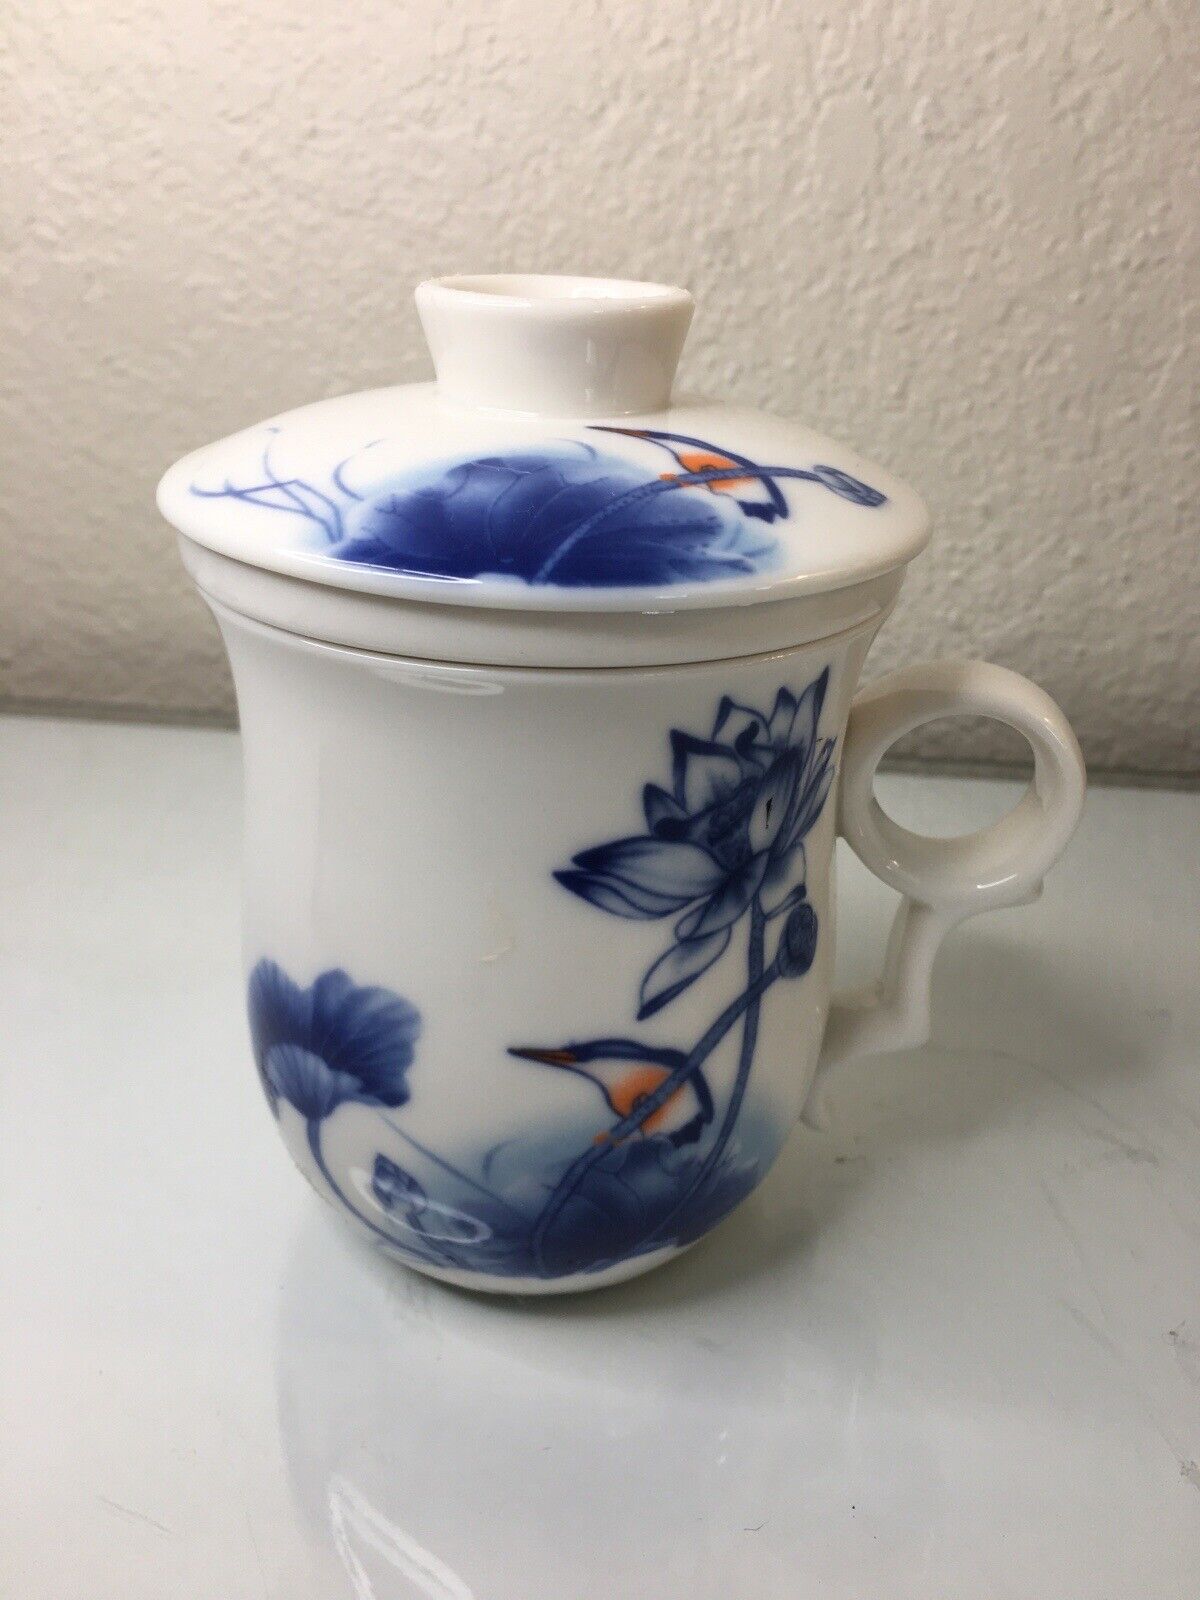  3 pc Chinese Porcelain Tea Cup Mug with Infuser Strainer & Lid Blue White   